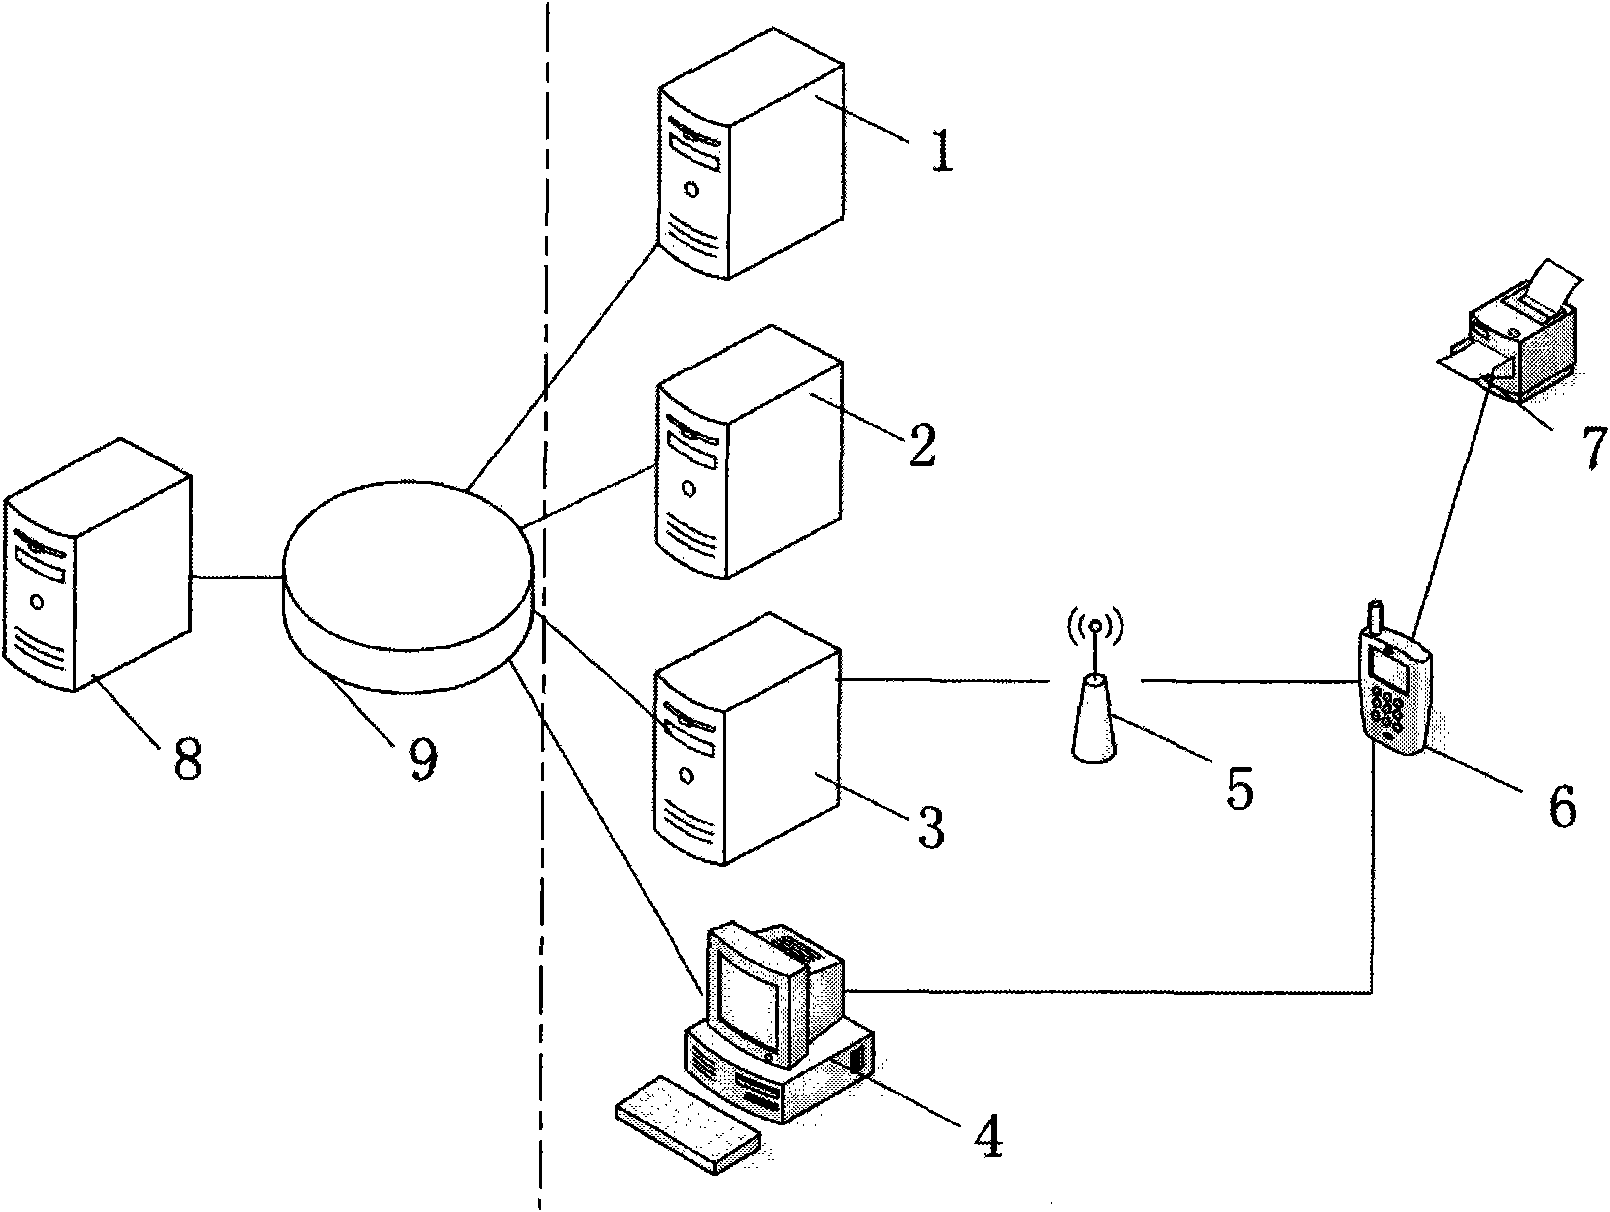 Movable electrical inspection application system